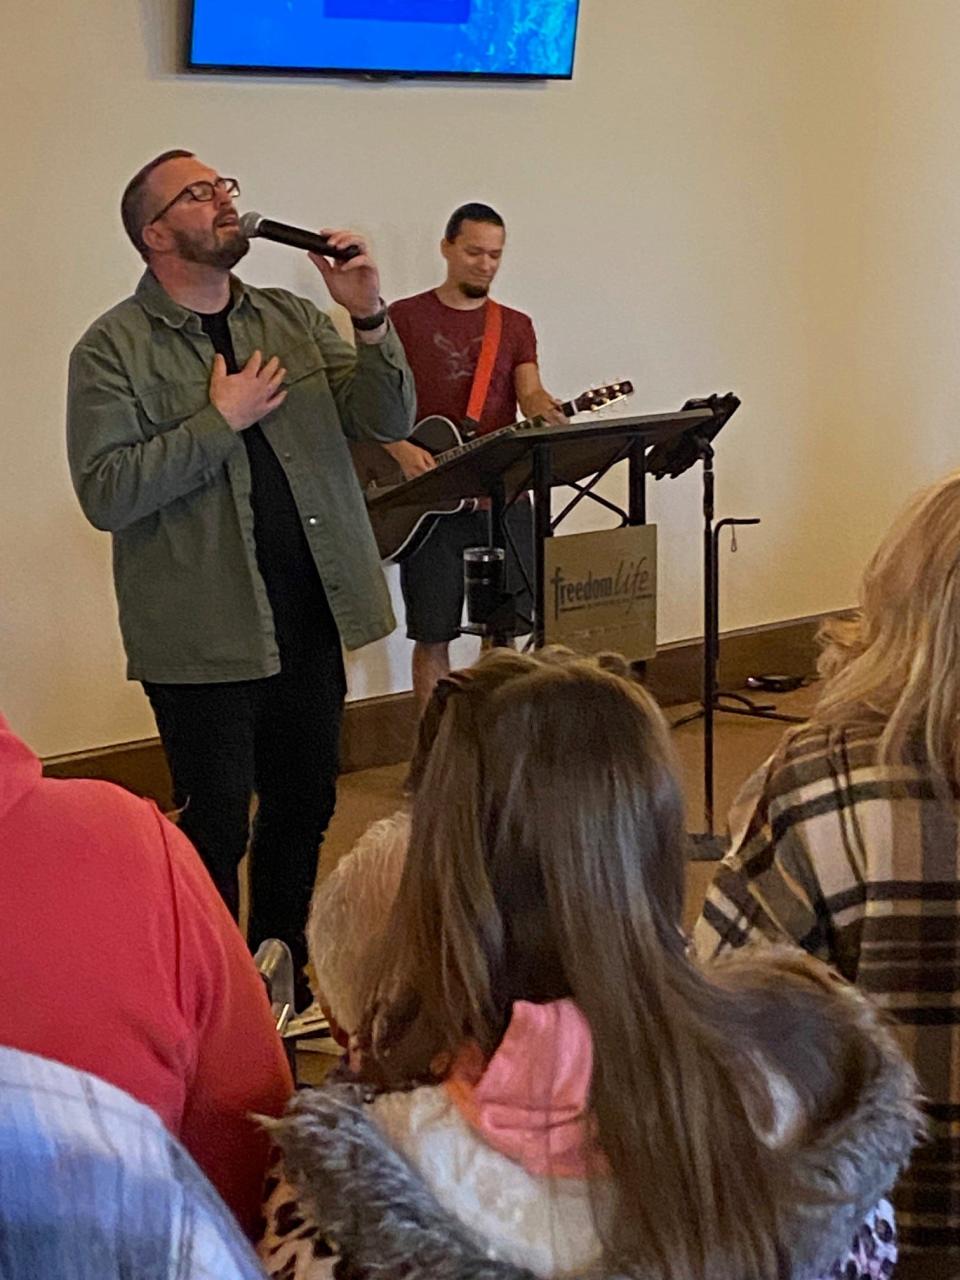 Matthew Holladay, lead pastor at Winchester's Freedom Life Church, leads his congregation in a song at a Sunday morning service held at the Town Square Community Centre. Thursday night's tornado demolished Freedom Life Church's longtime home along Greenville Pike.